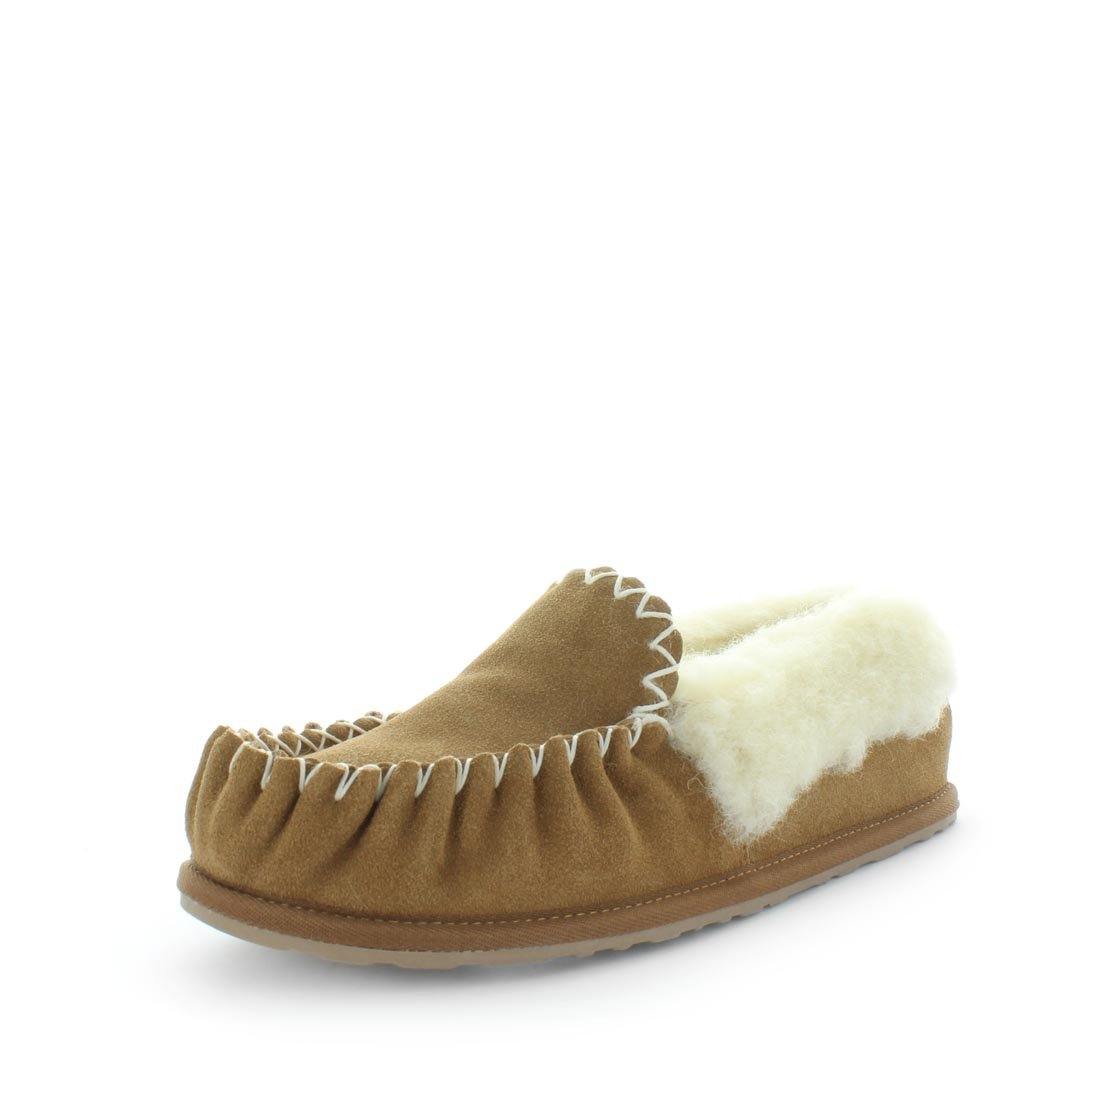 Mens slipper chums by just bee uggs, uggs boots - just bee slippers - mens slippers, moccasin slippers, wool slippers, 100% wool slippers.  (6535825915983)